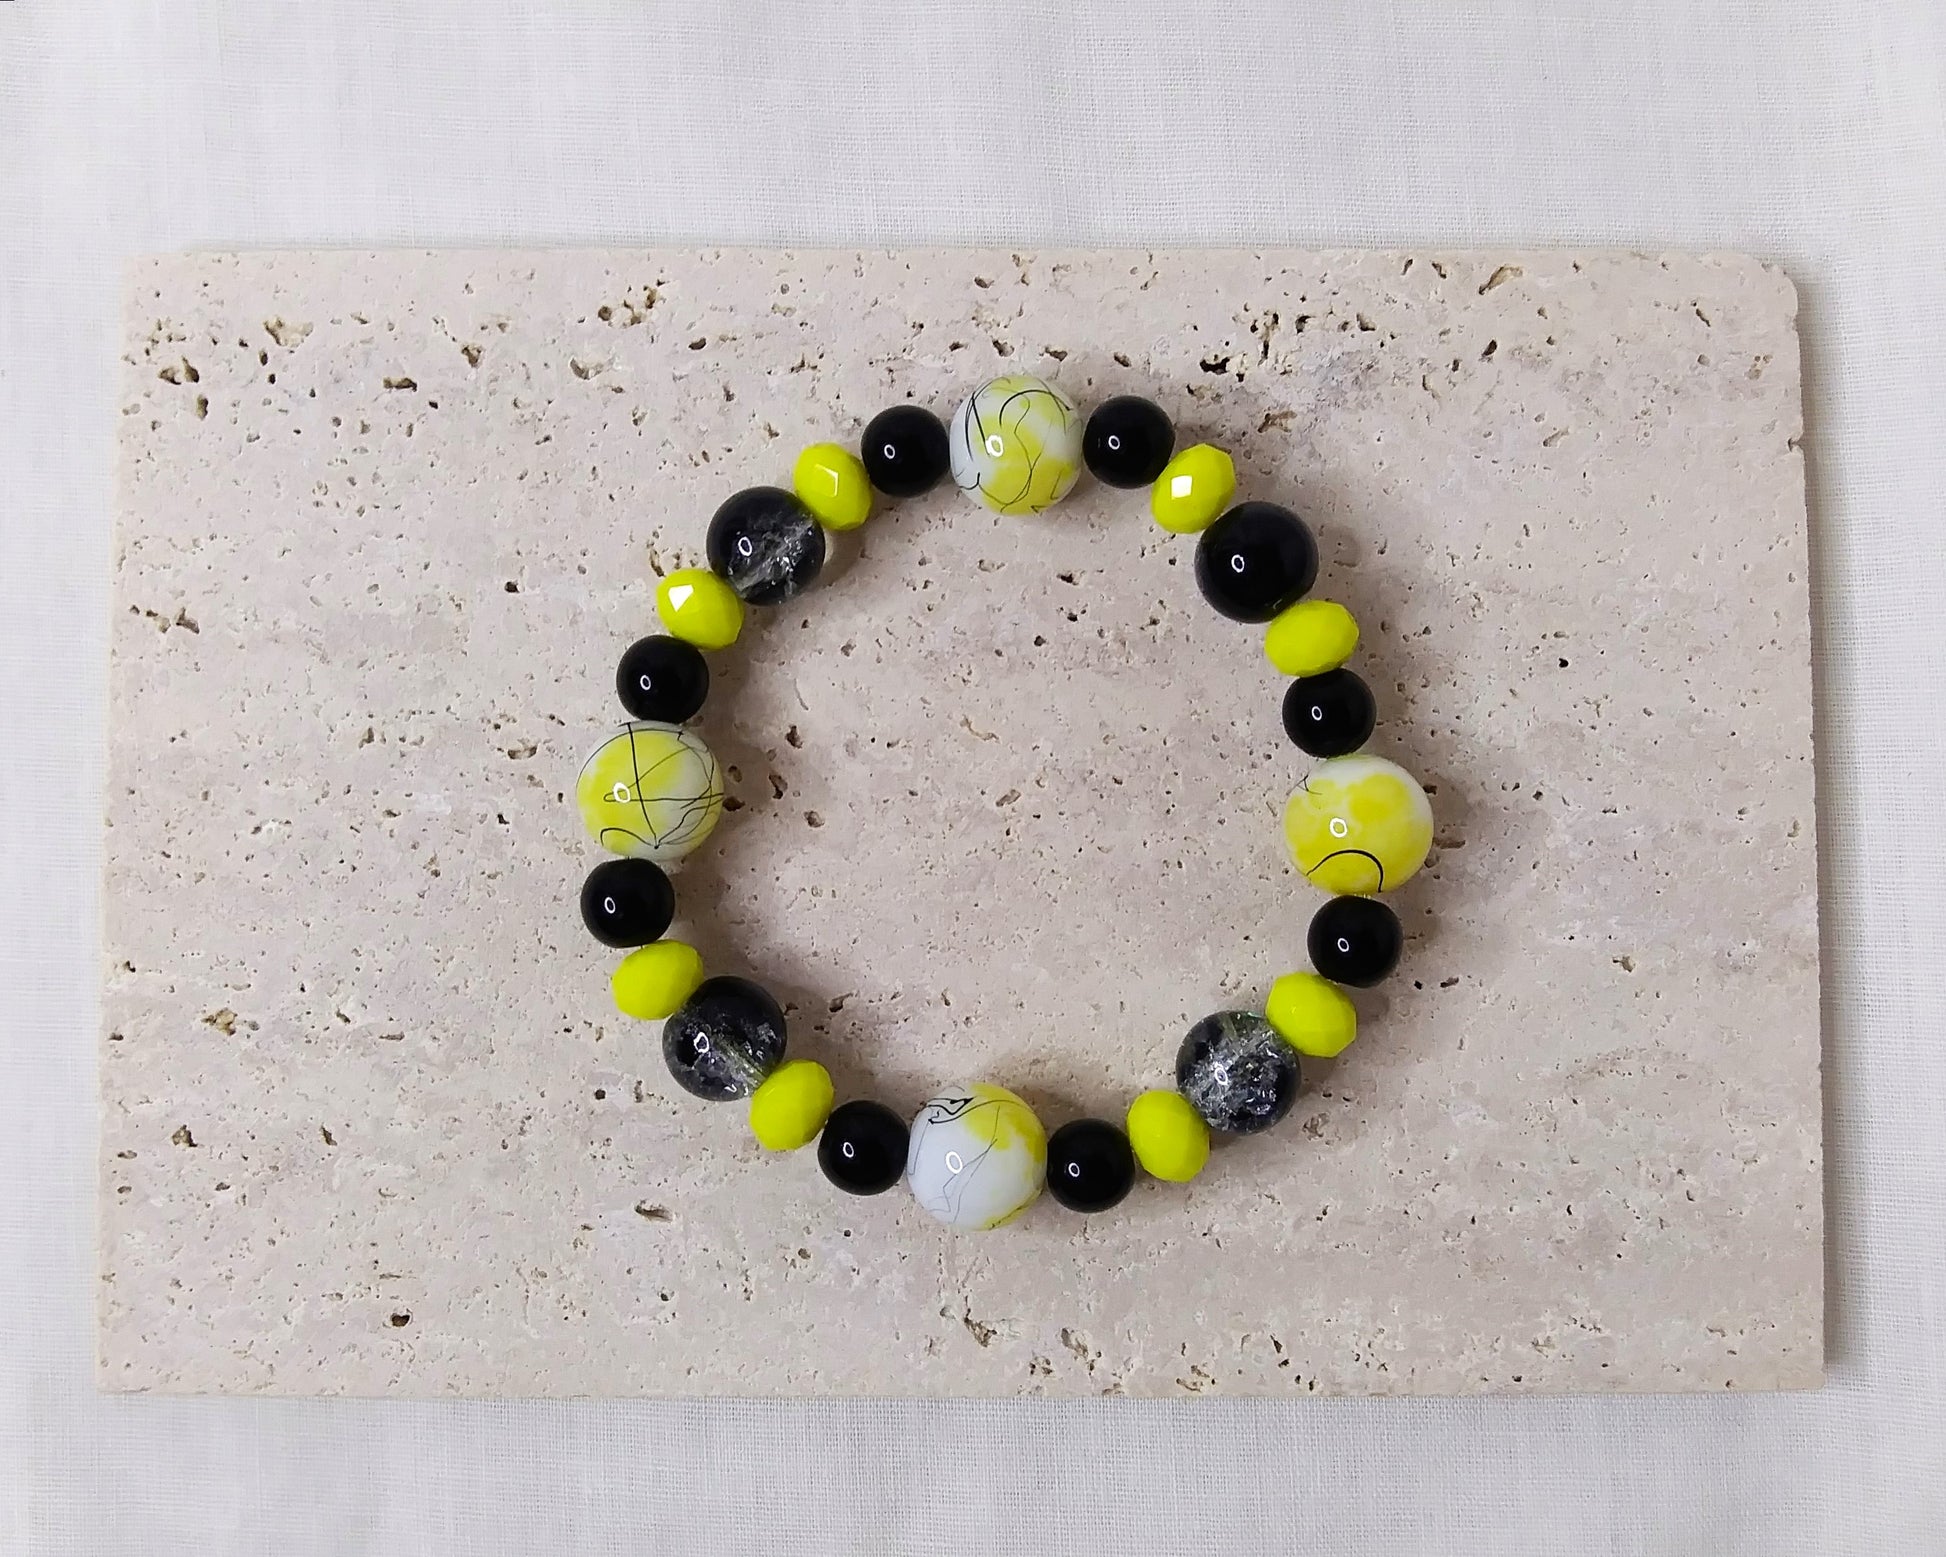 Yellow and black stretch stackable bracelet 